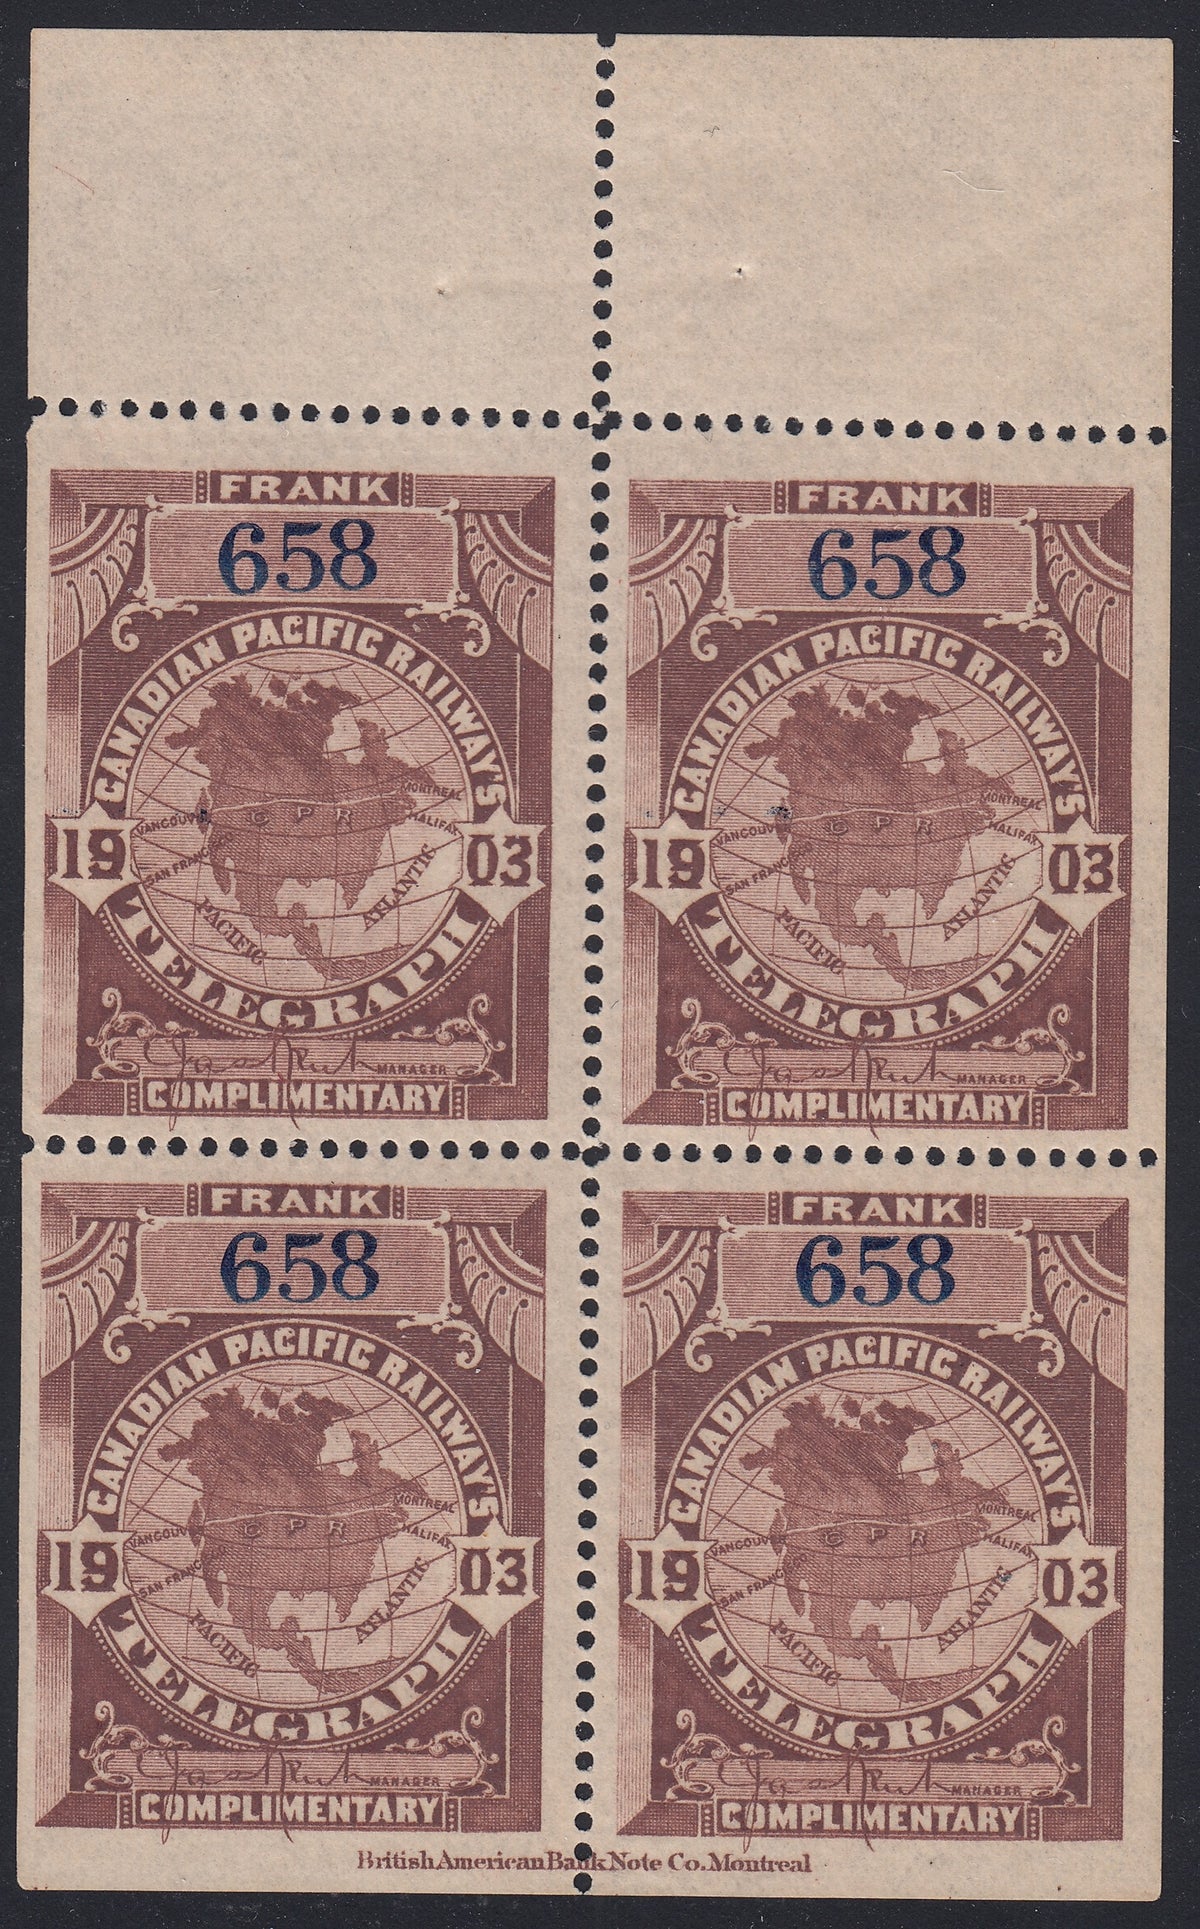 0016CP1712 - TCP16 - Mint Booklet Pane